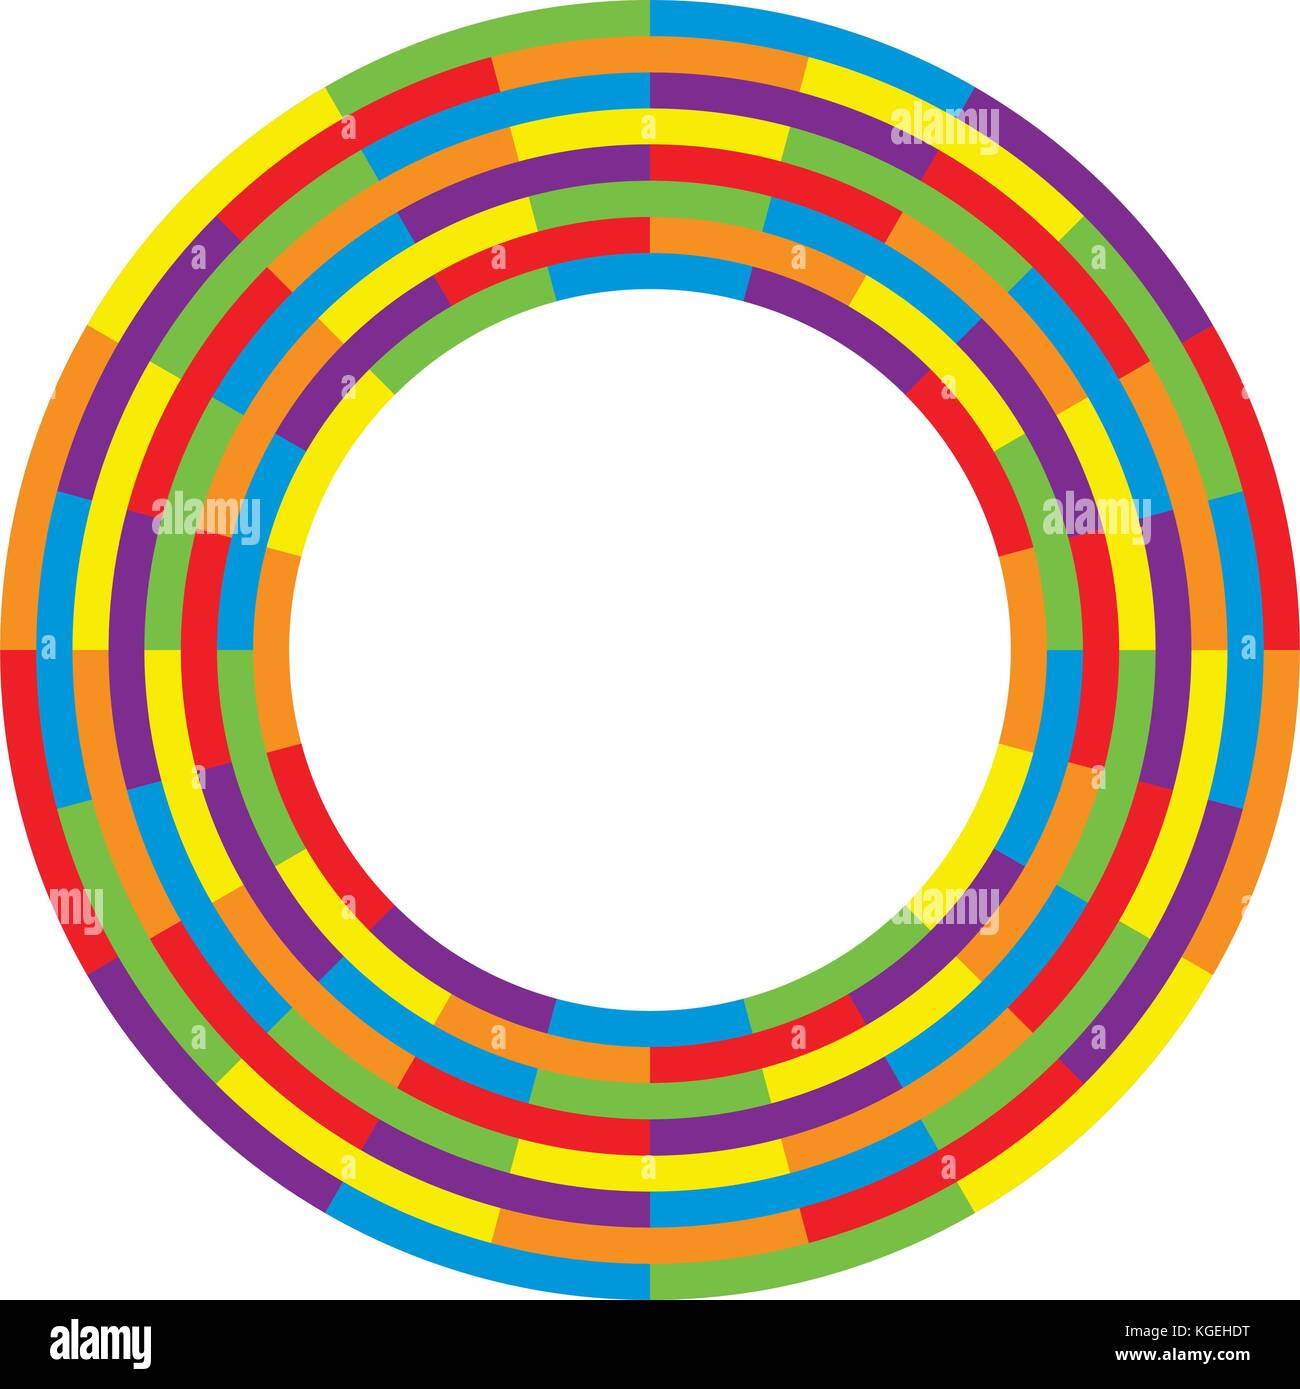 vector abstract background design of round wheel circle with rainbow spectrum colors Stock Vector